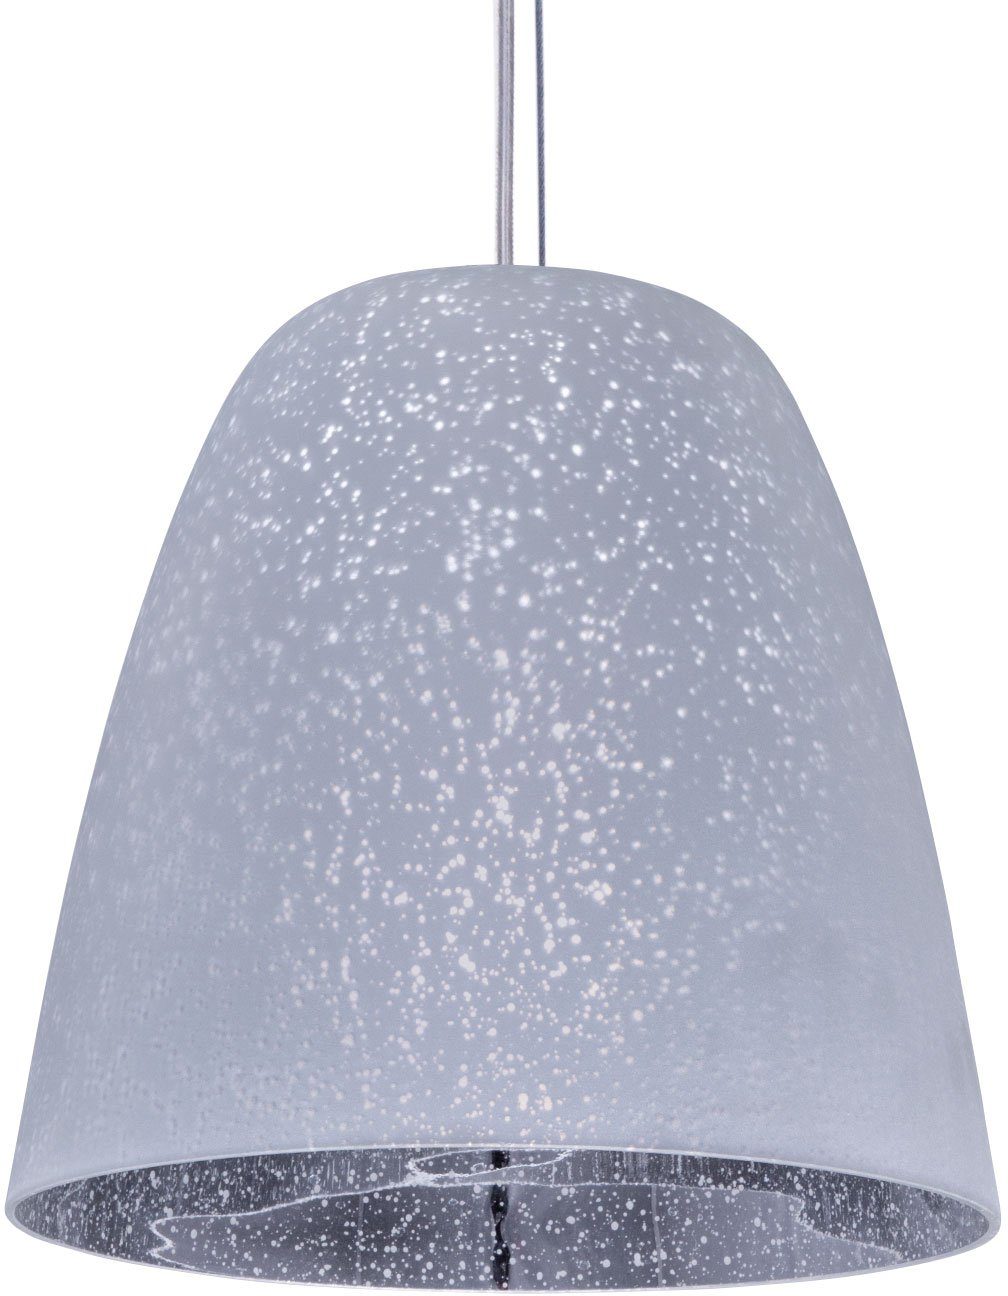 Paco Home Hanglamp Starlet